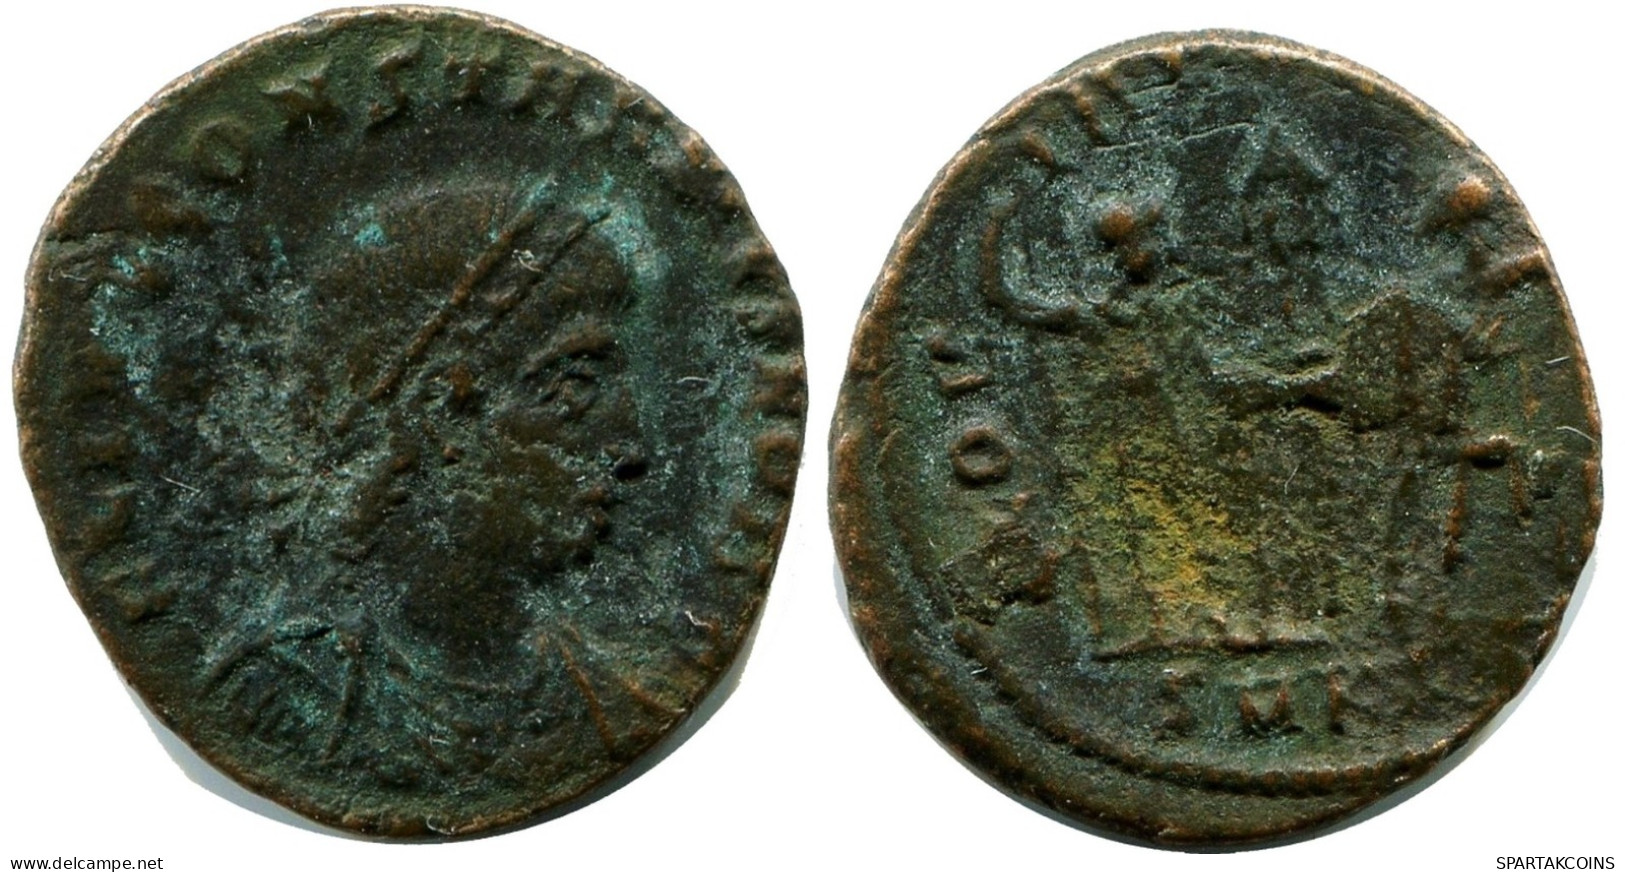 CONSTANS MINTED IN CYZICUS FROM THE ROYAL ONTARIO MUSEUM #ANC11609.14.F.A - L'Empire Chrétien (307 à 363)